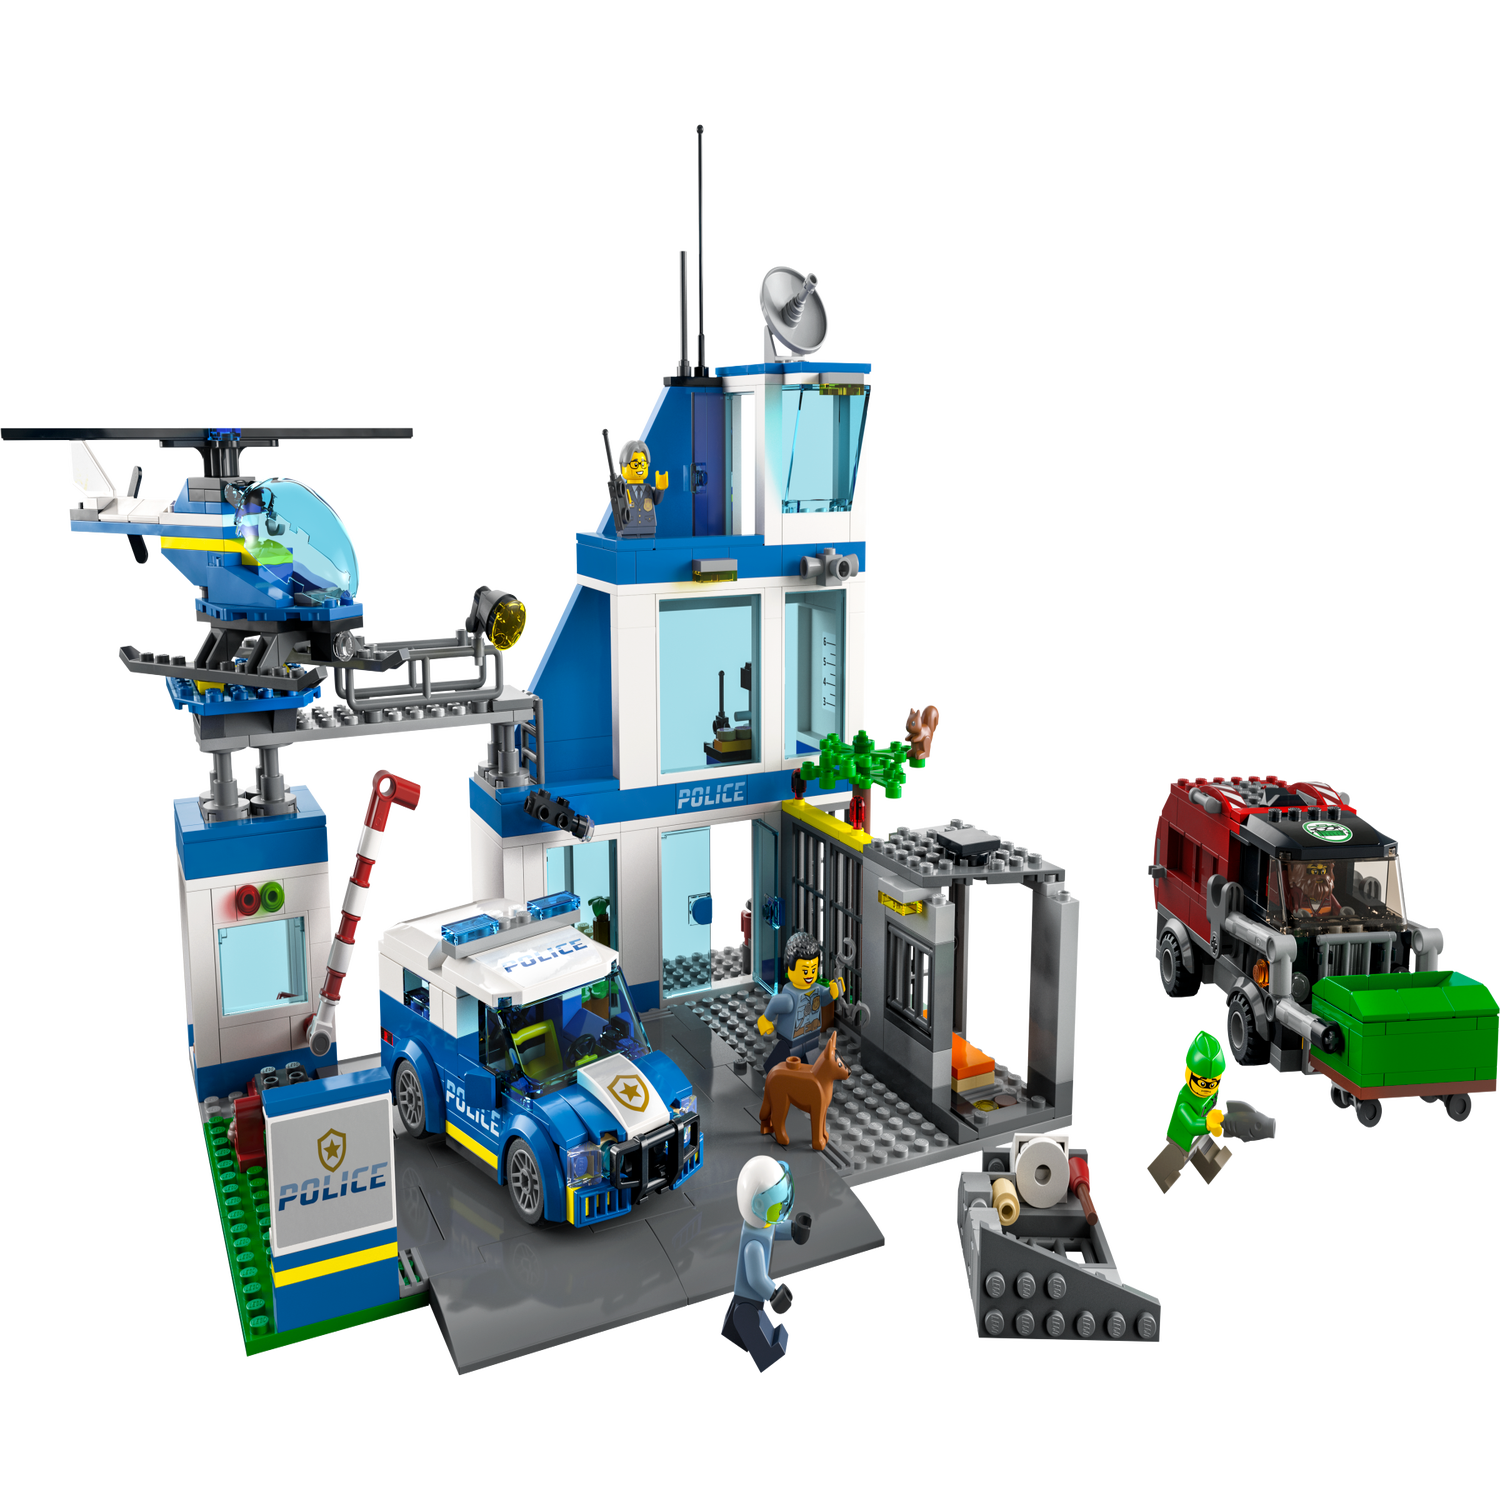 Construction Site 10990 | DUPLO® | Buy online at the Official LEGO® Shop US